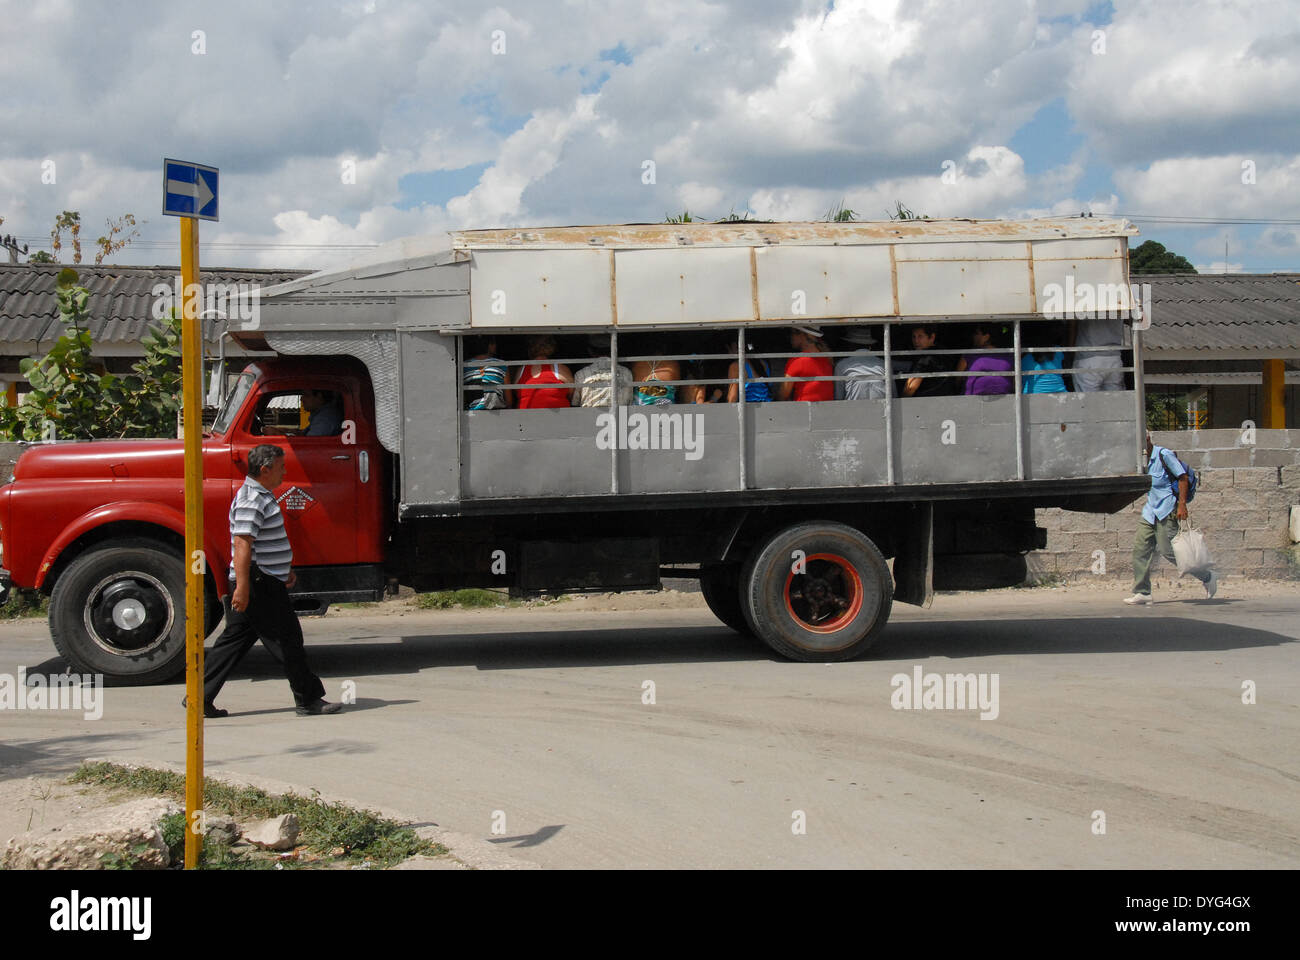 A typical bus service for the local people in the city of Holguin, Eastern Cuba Stock Photo